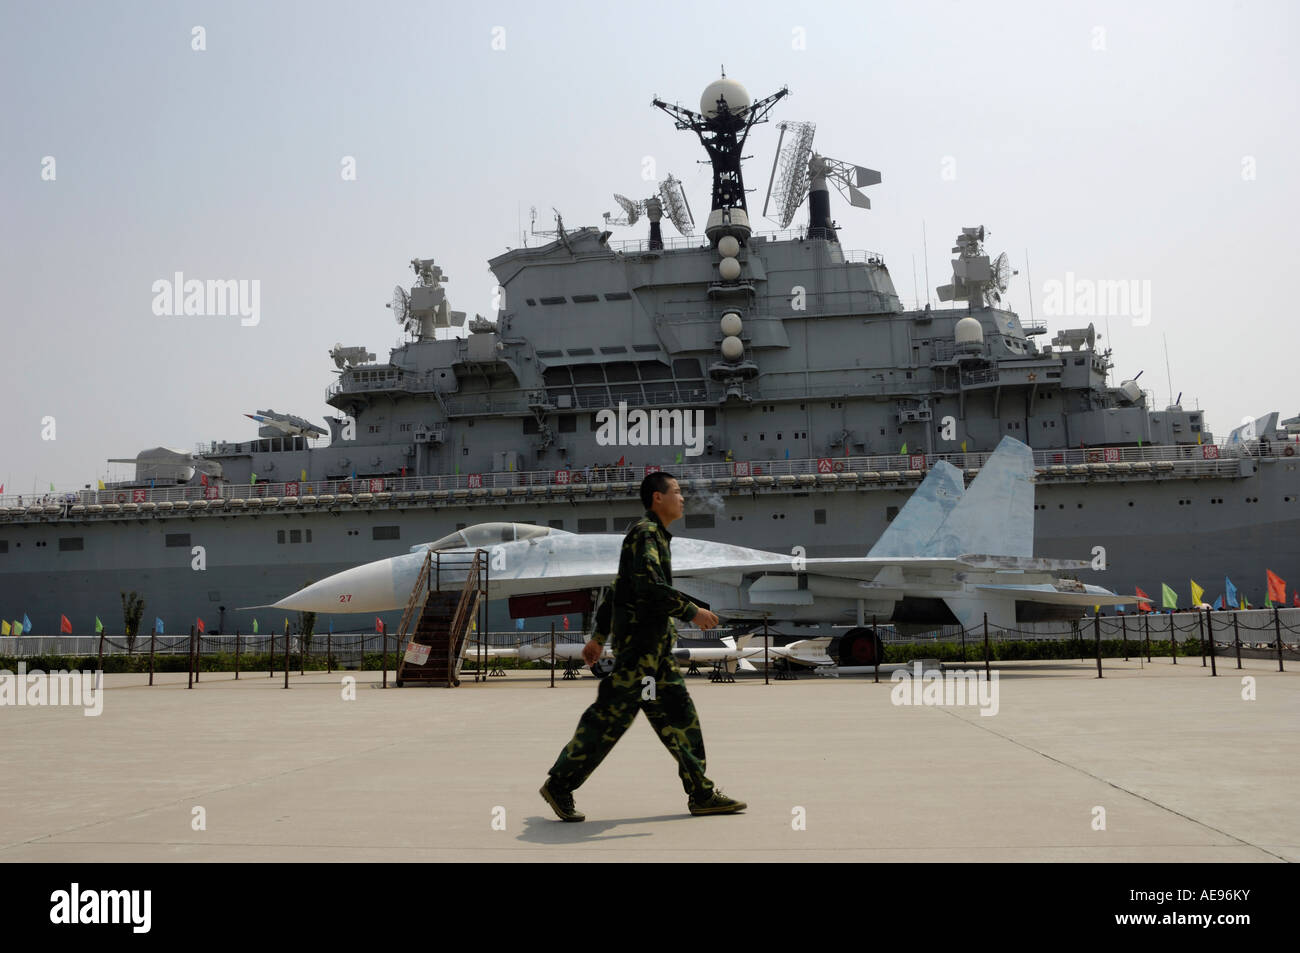 Soviet aircraft carrier Kiev and Su-27 in the military theme park in Tianjin China 19 Aug 2007 Stock Photo